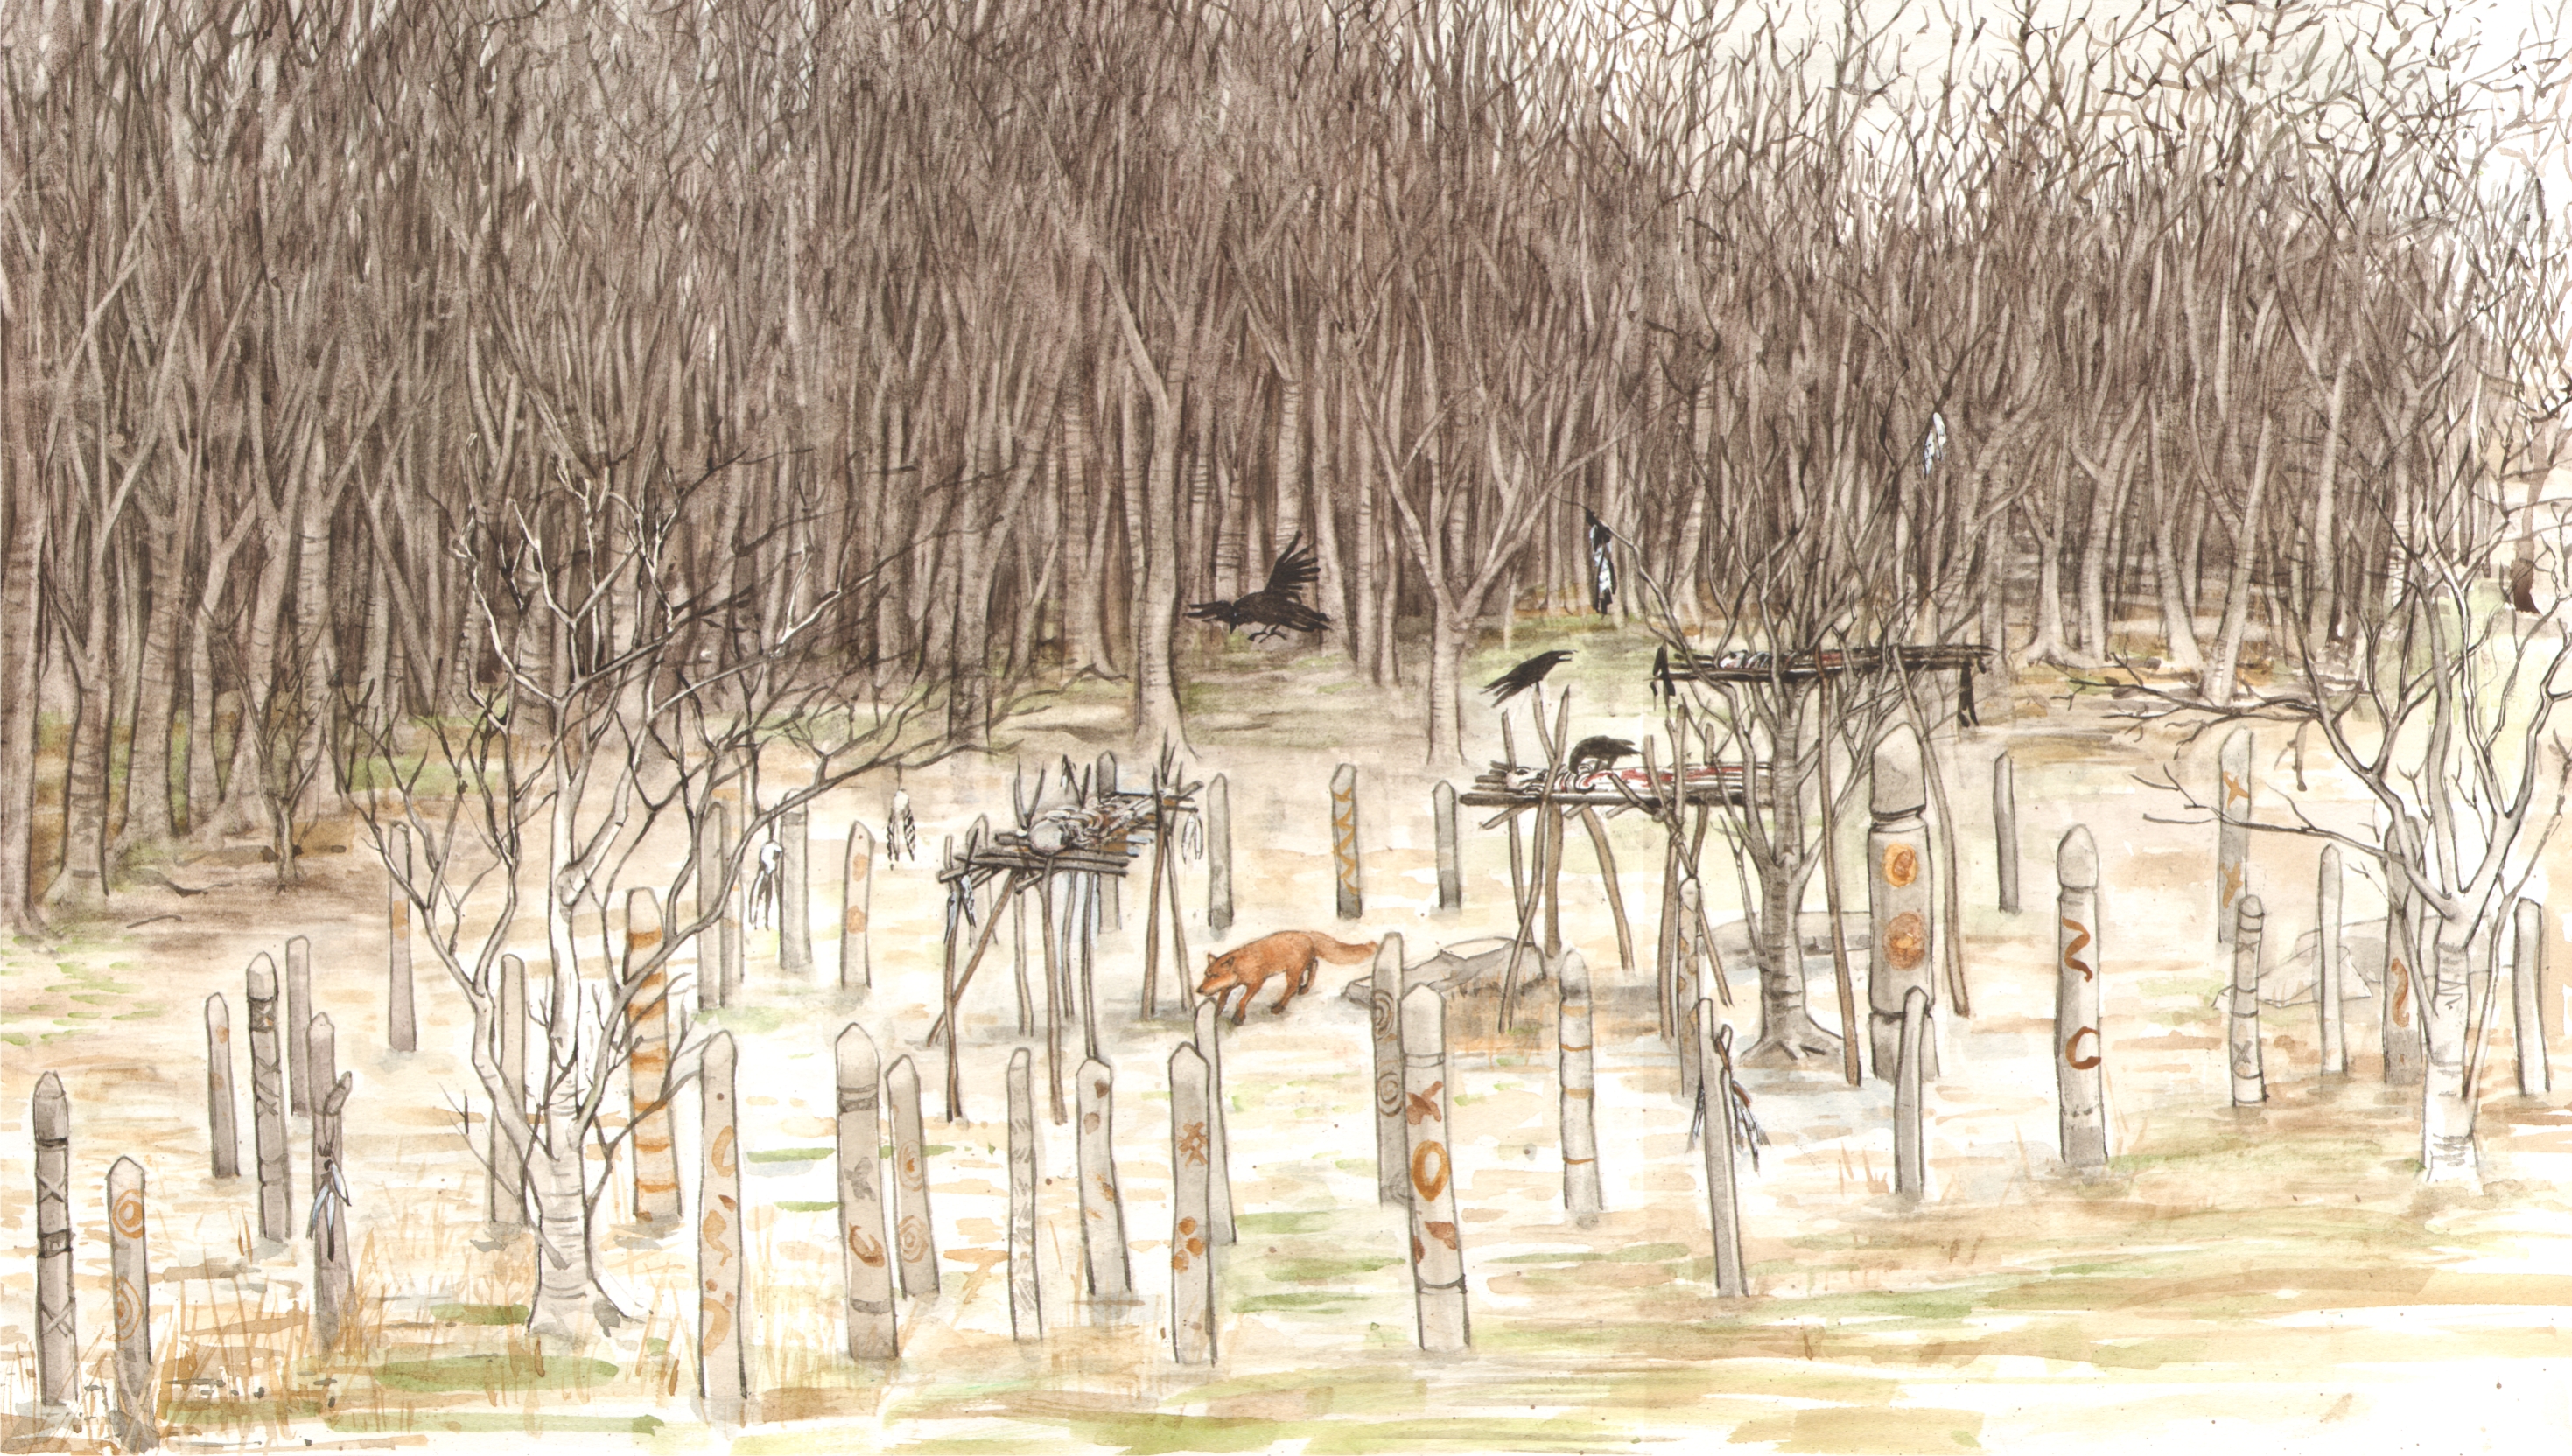 An artists impression of the Neolithic site at Aden Country Park